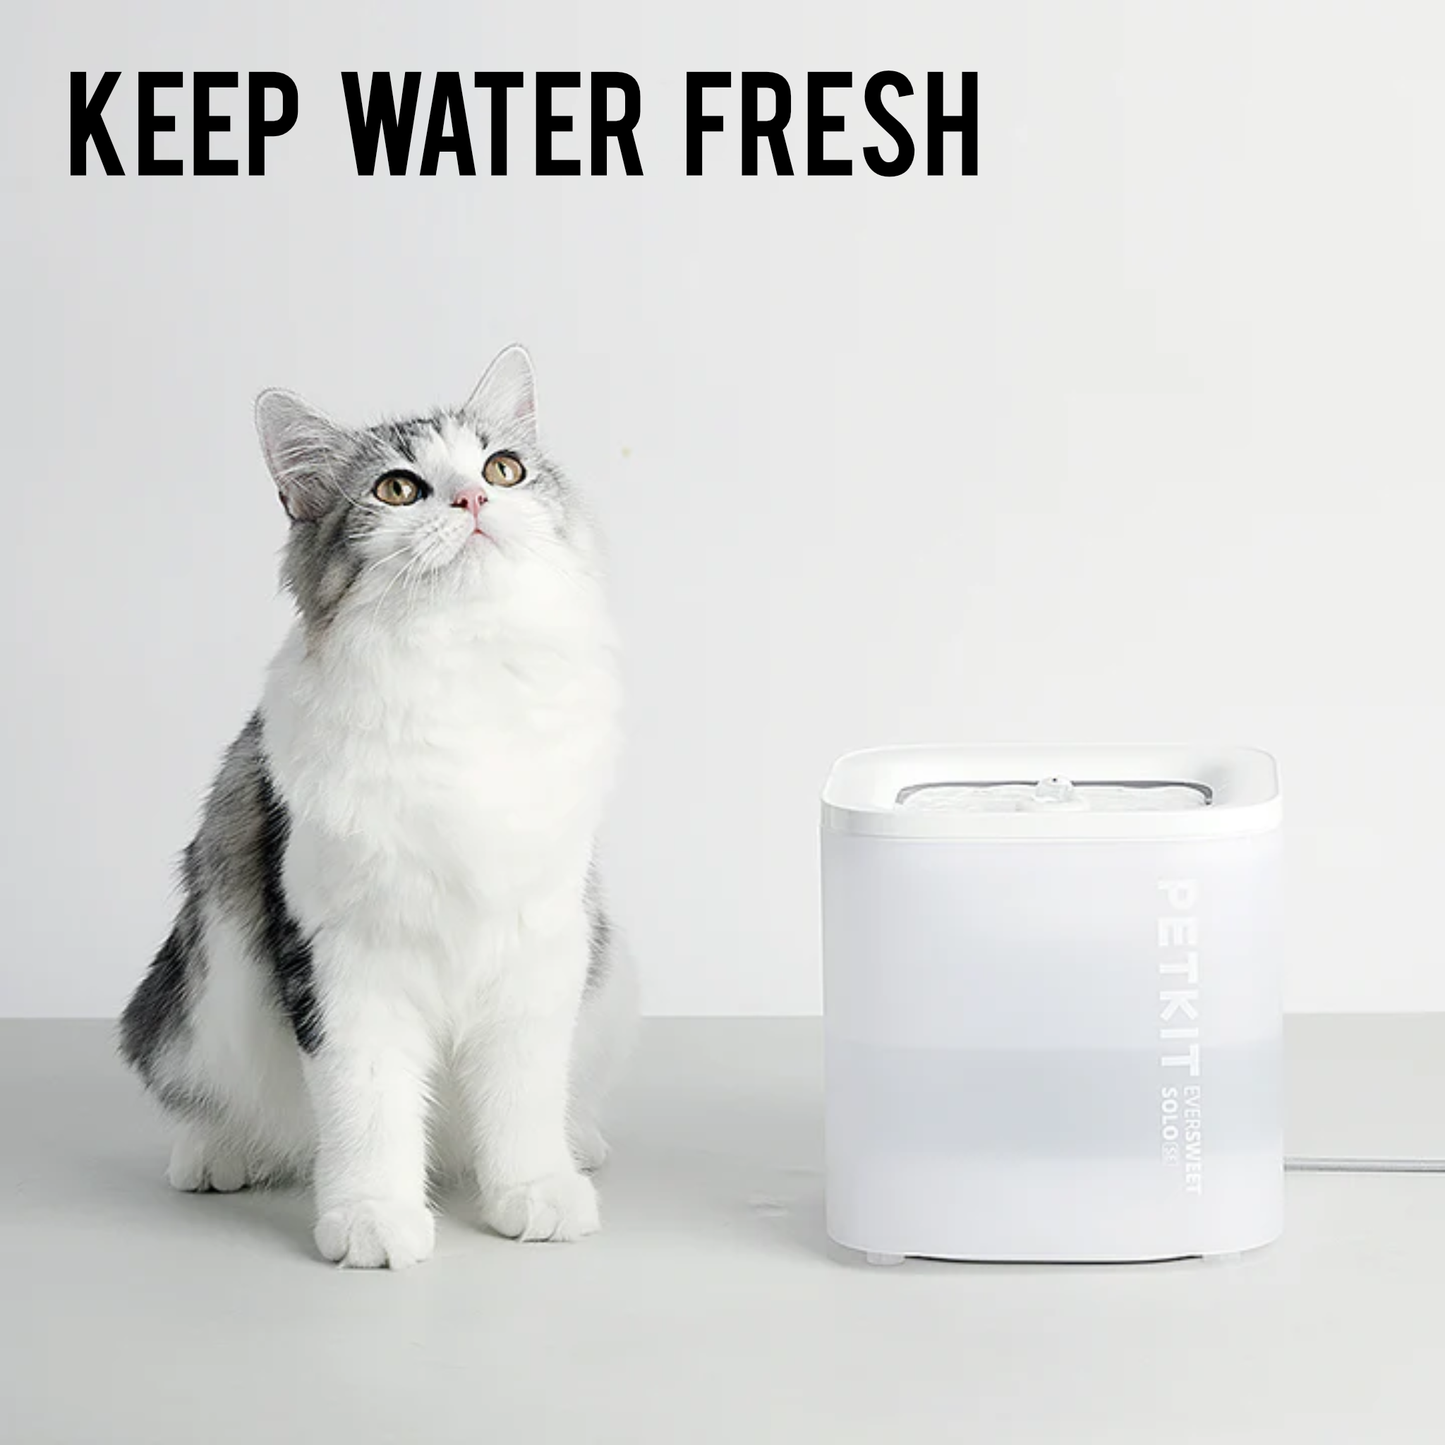 PETKIT Eversweet SOLO SE Wireless Pump Automatic Water Fountain Water Dispenser - White or Grey